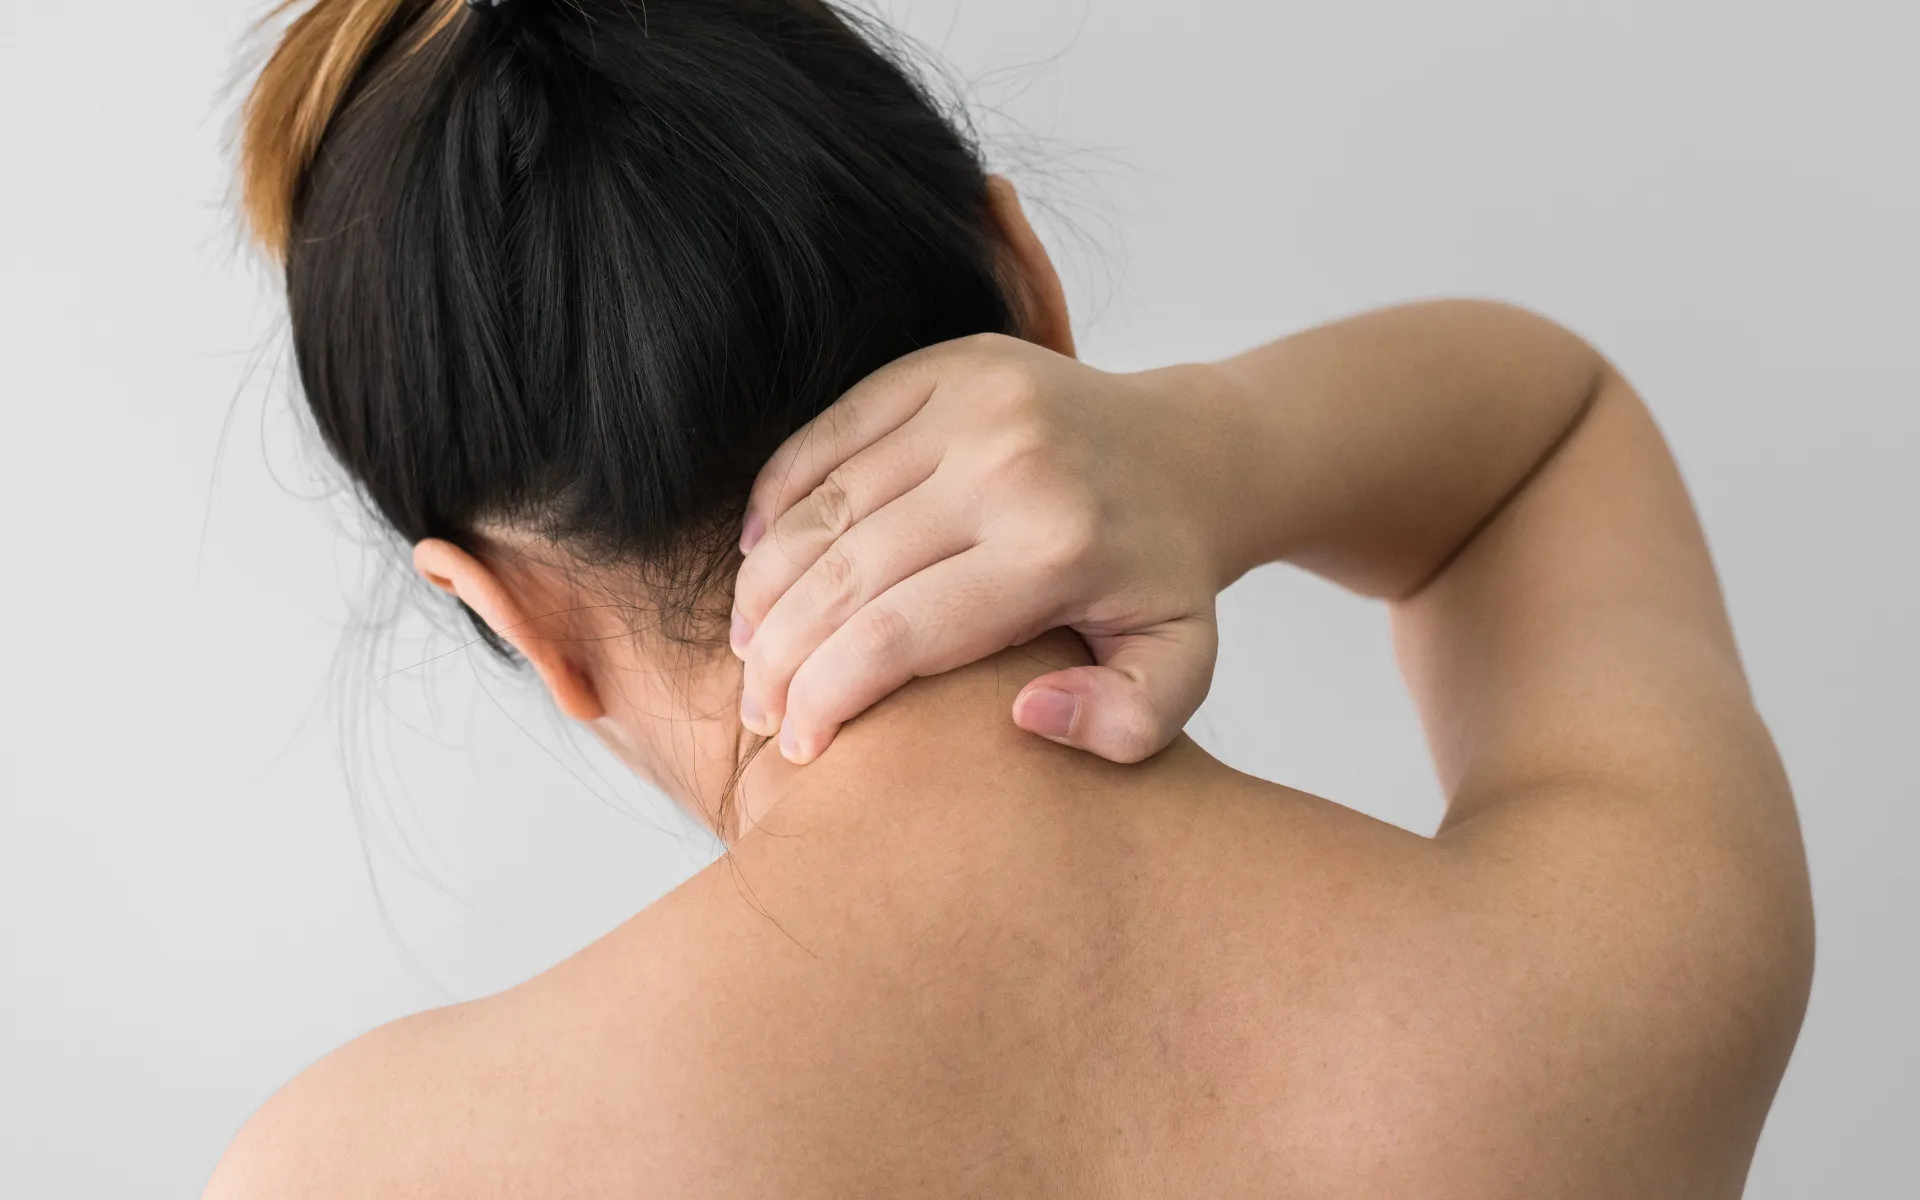 15 Reasons Why Your Back Hurts